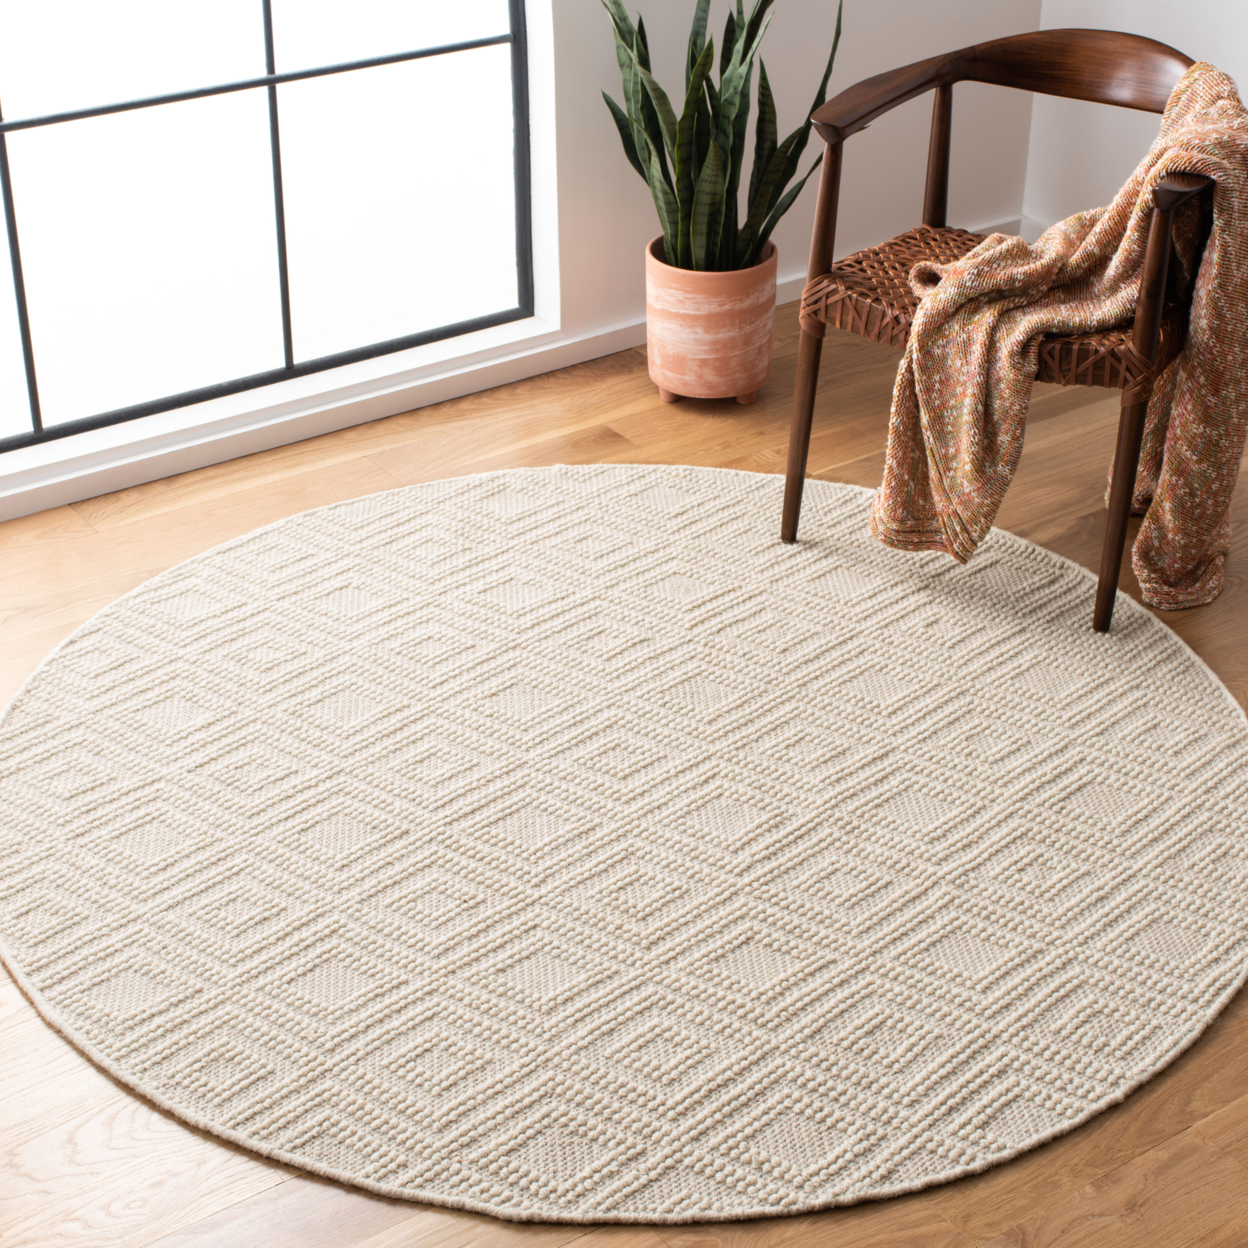 SAFAVIEH Vermont Collection VRM212A Handwoven Ivory Rug - 6 X 6 Square